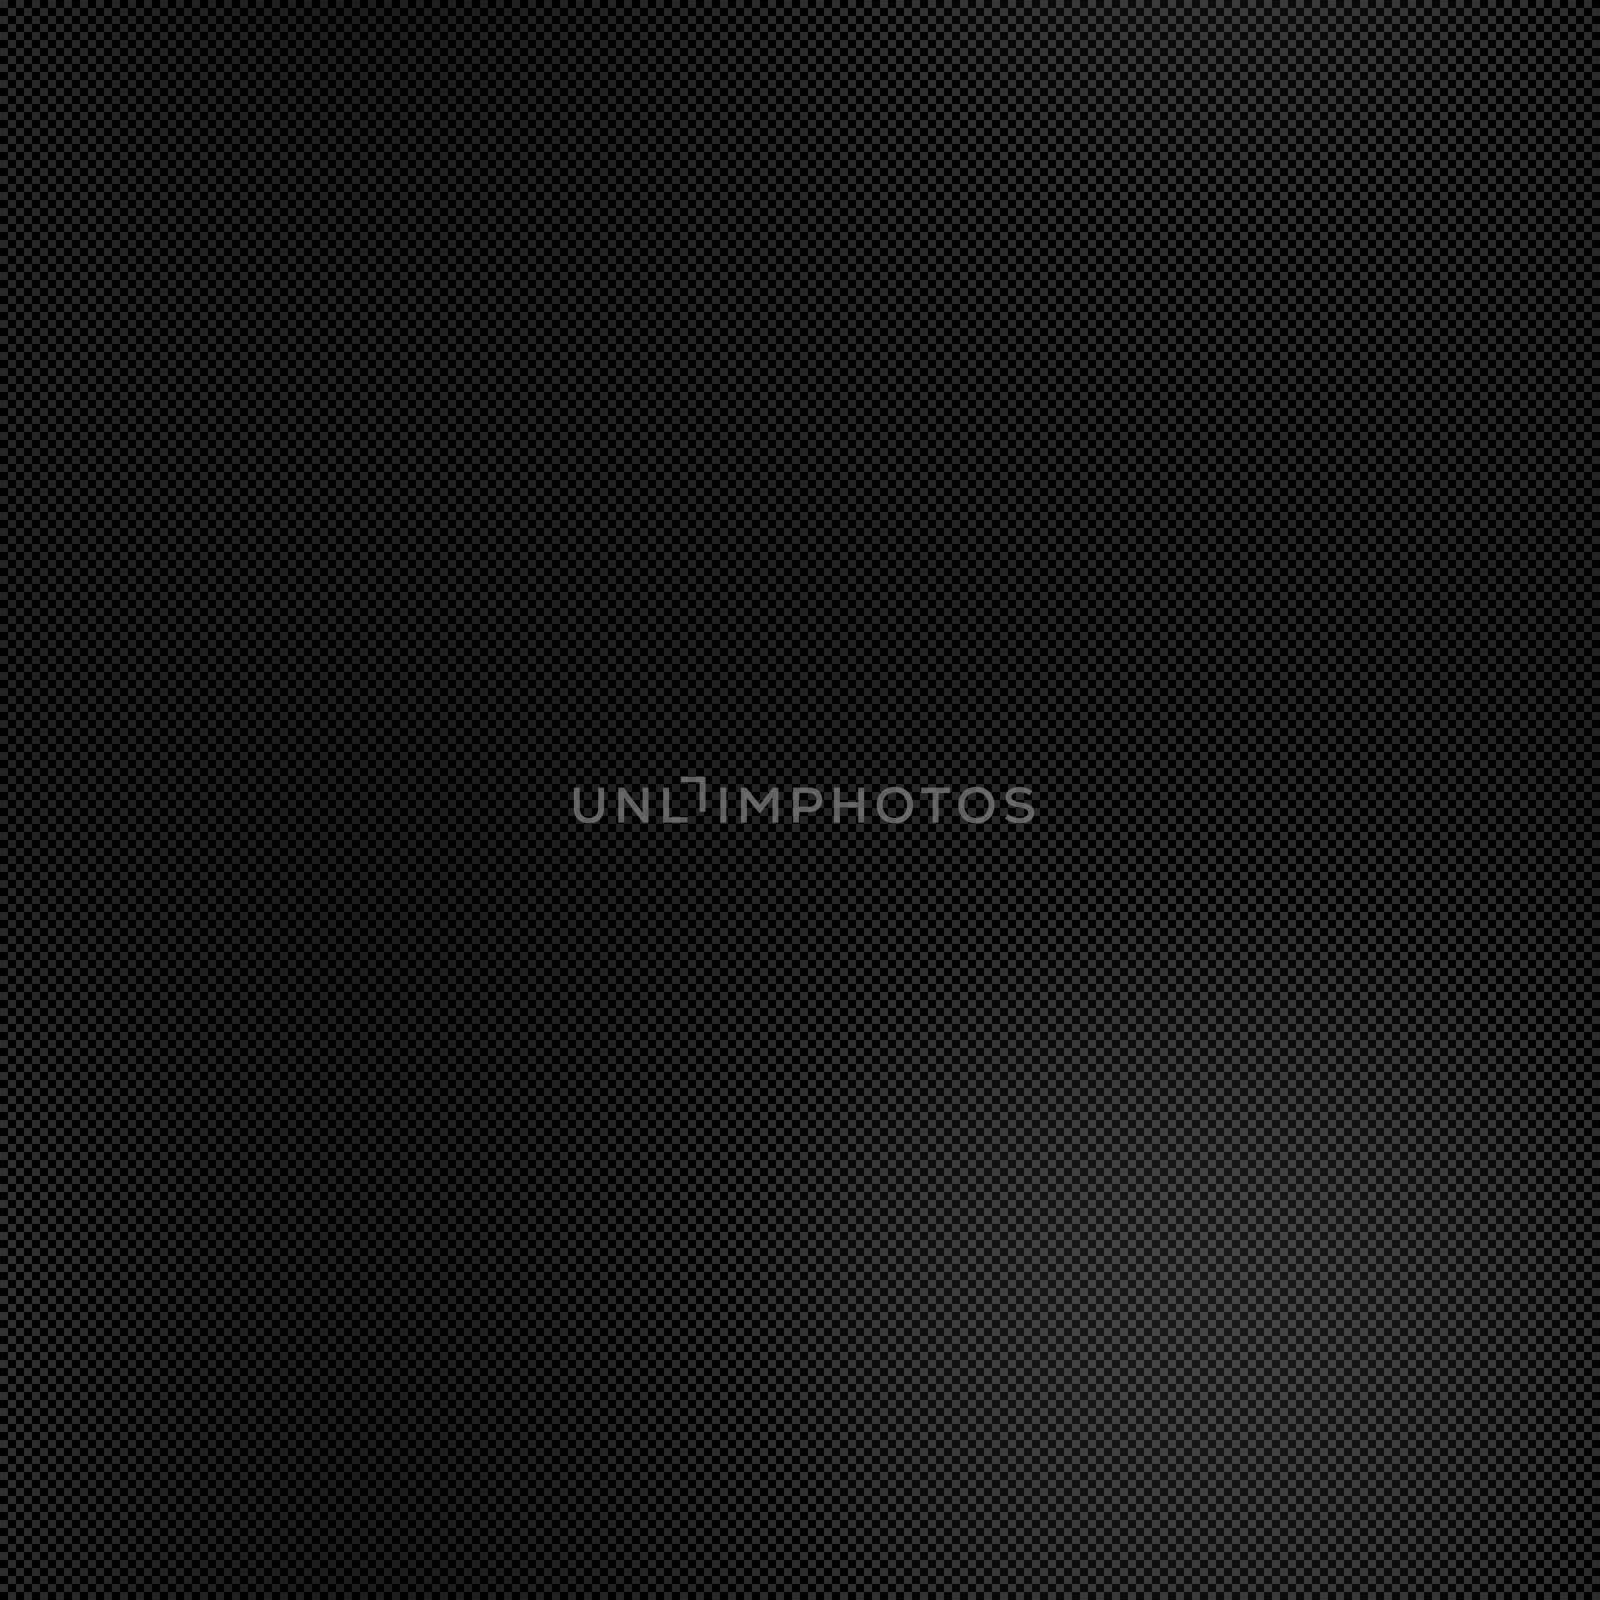 Carbon Mesh Texture Background as Black Gray